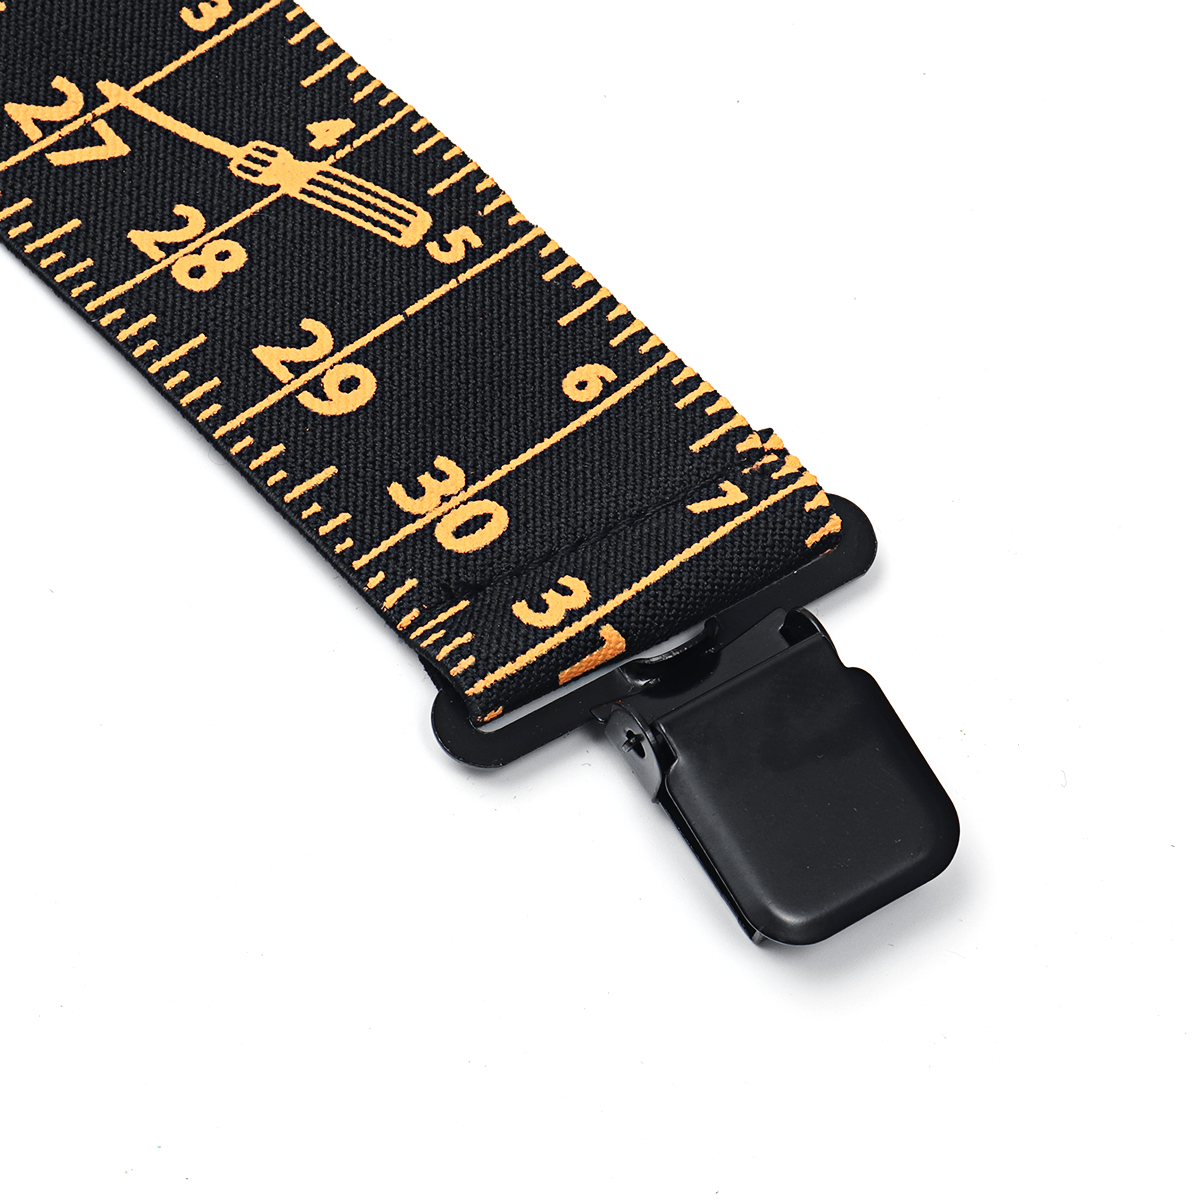 2inch-Wide-Adjustable-Ruler-Heavy-Duty-Belt-Tool-Braces-Suspender-for-Pouch-1570182-8